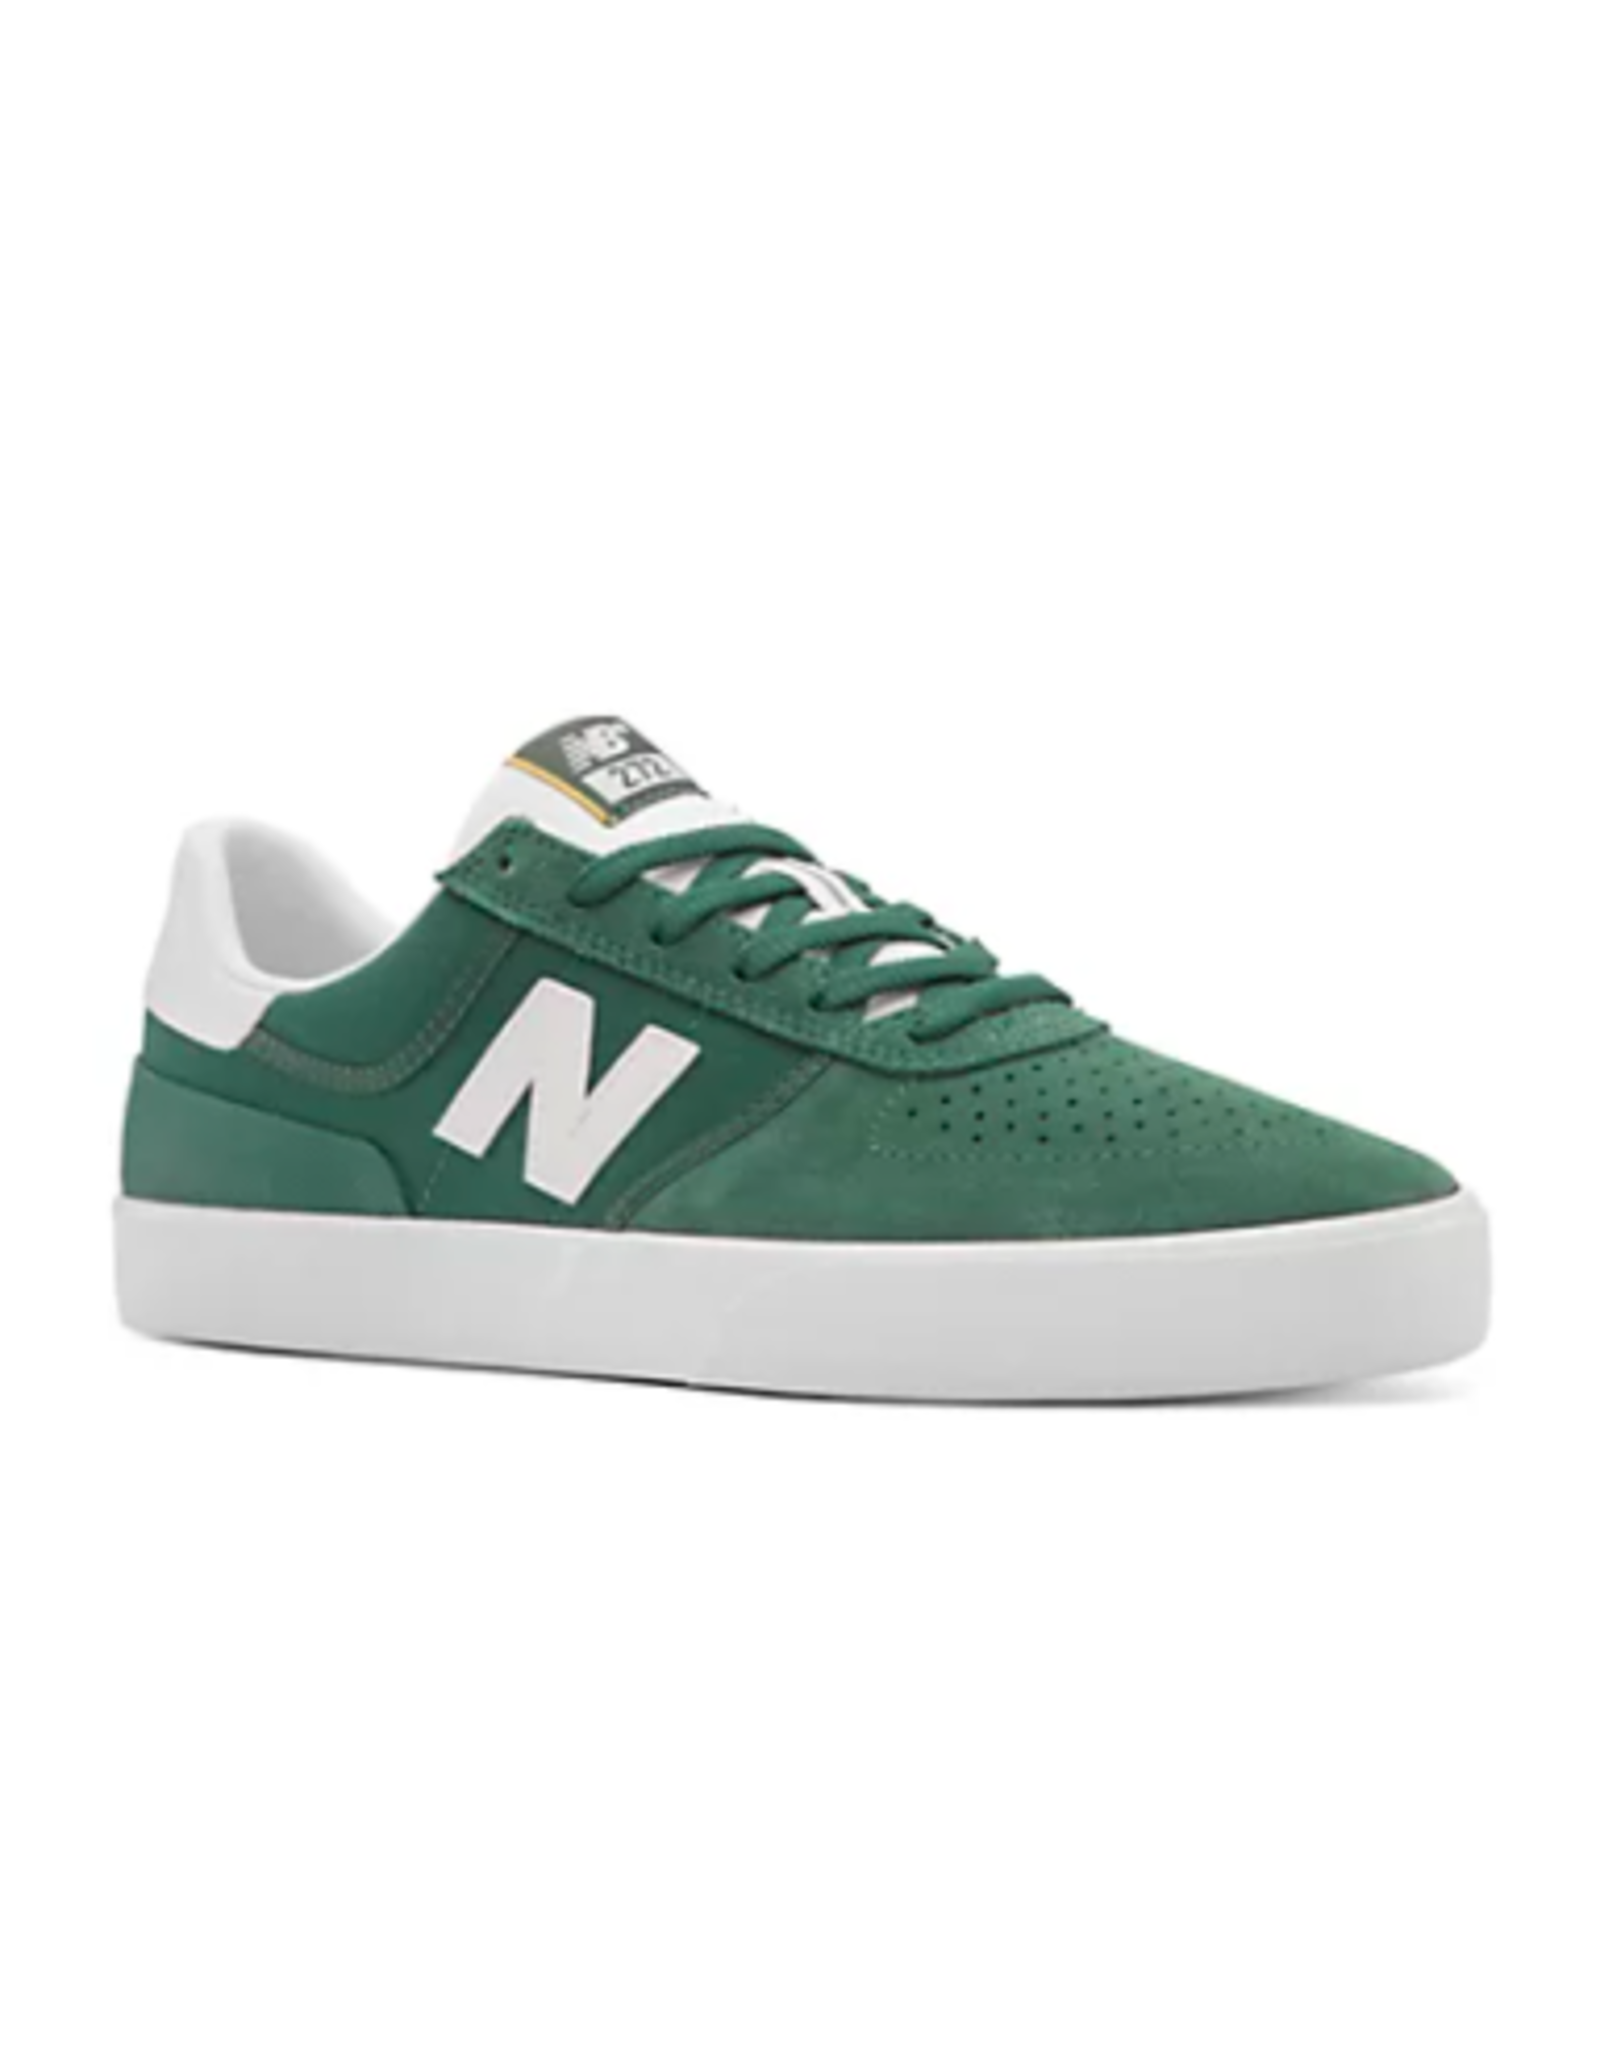 New Balance Men's Numeric 272 Shoes Green with White